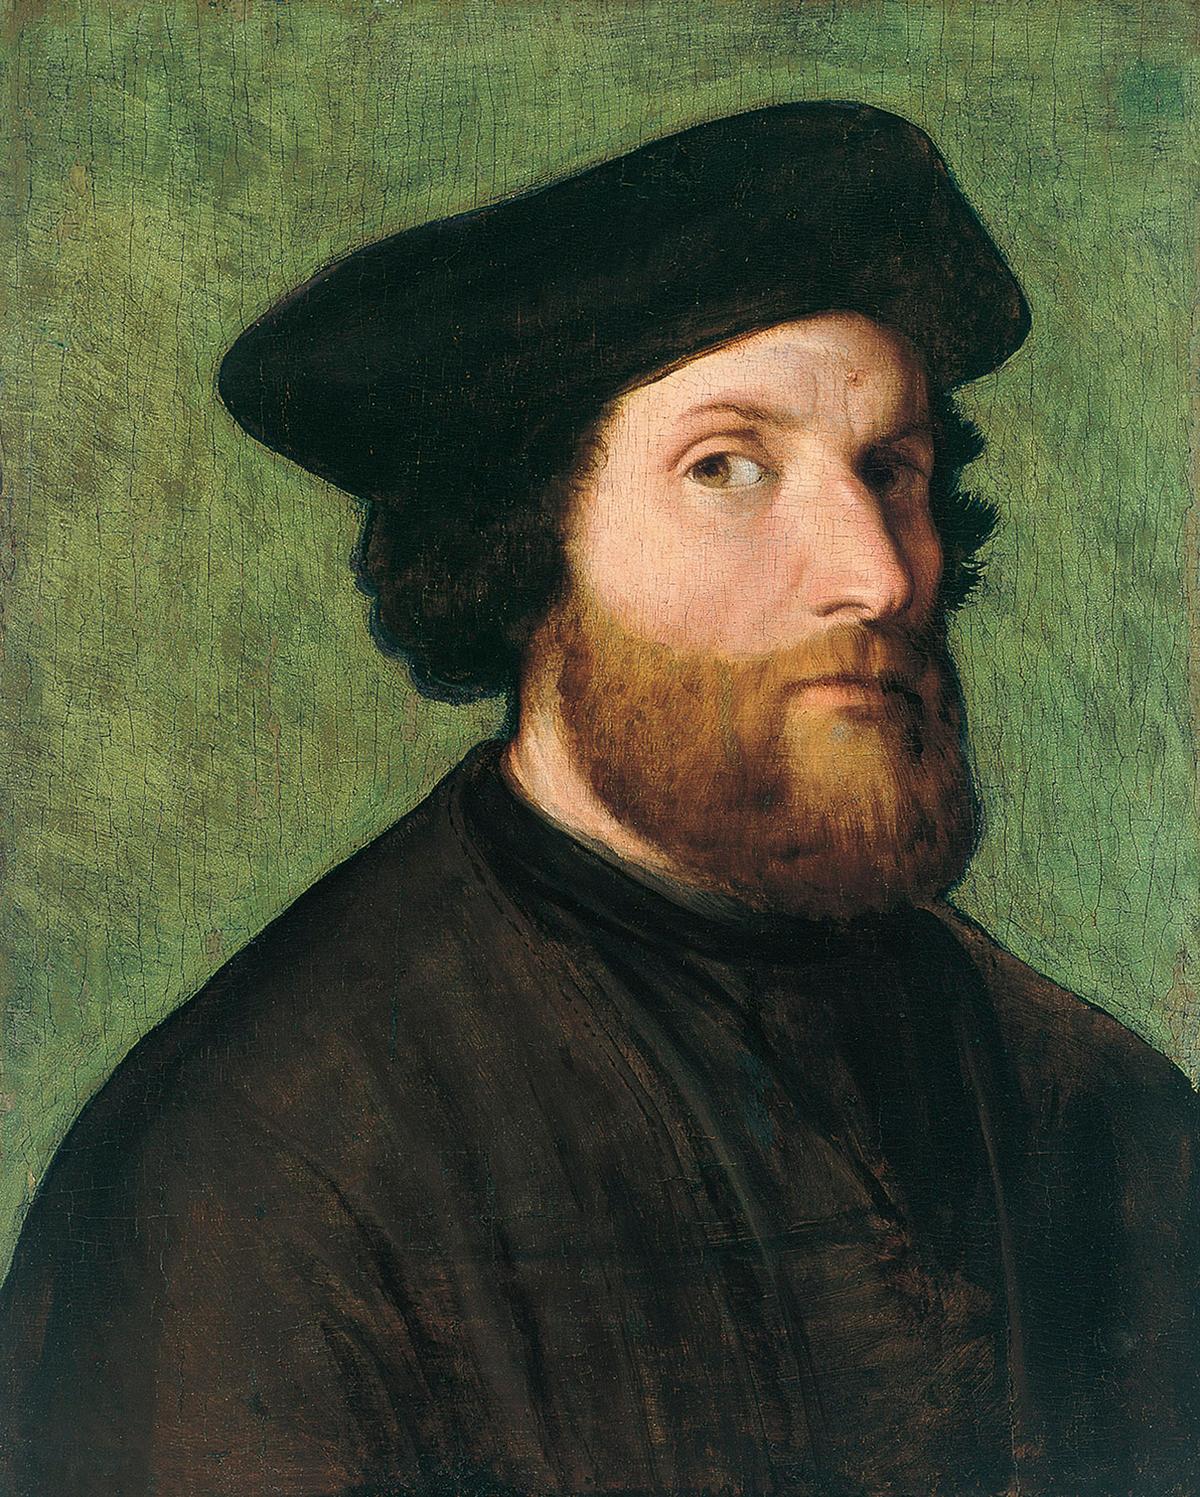 A presumed self-portrait, 1540s, attributed to Lorenzo Lotto. Oil on panel; 16 9/10 inches by 13 7/10 inches. Thyssen-Bornemisza Museum, Madrid, Spain. (Public Domain)